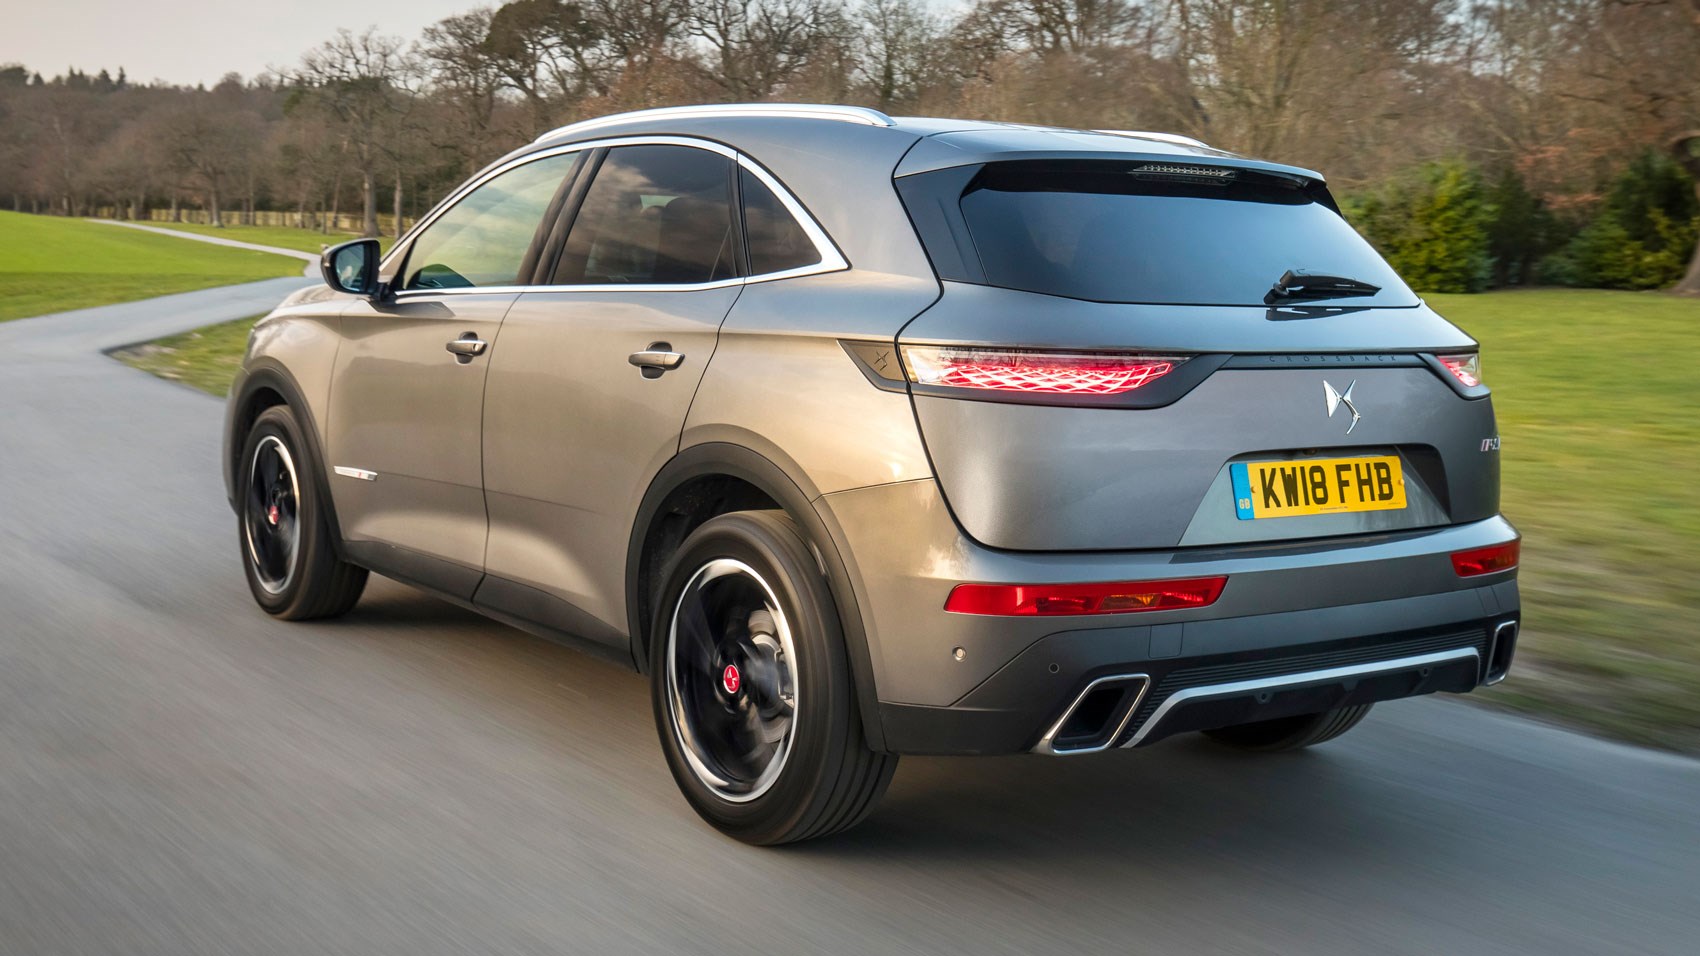 DS7 Crossback rear tracking